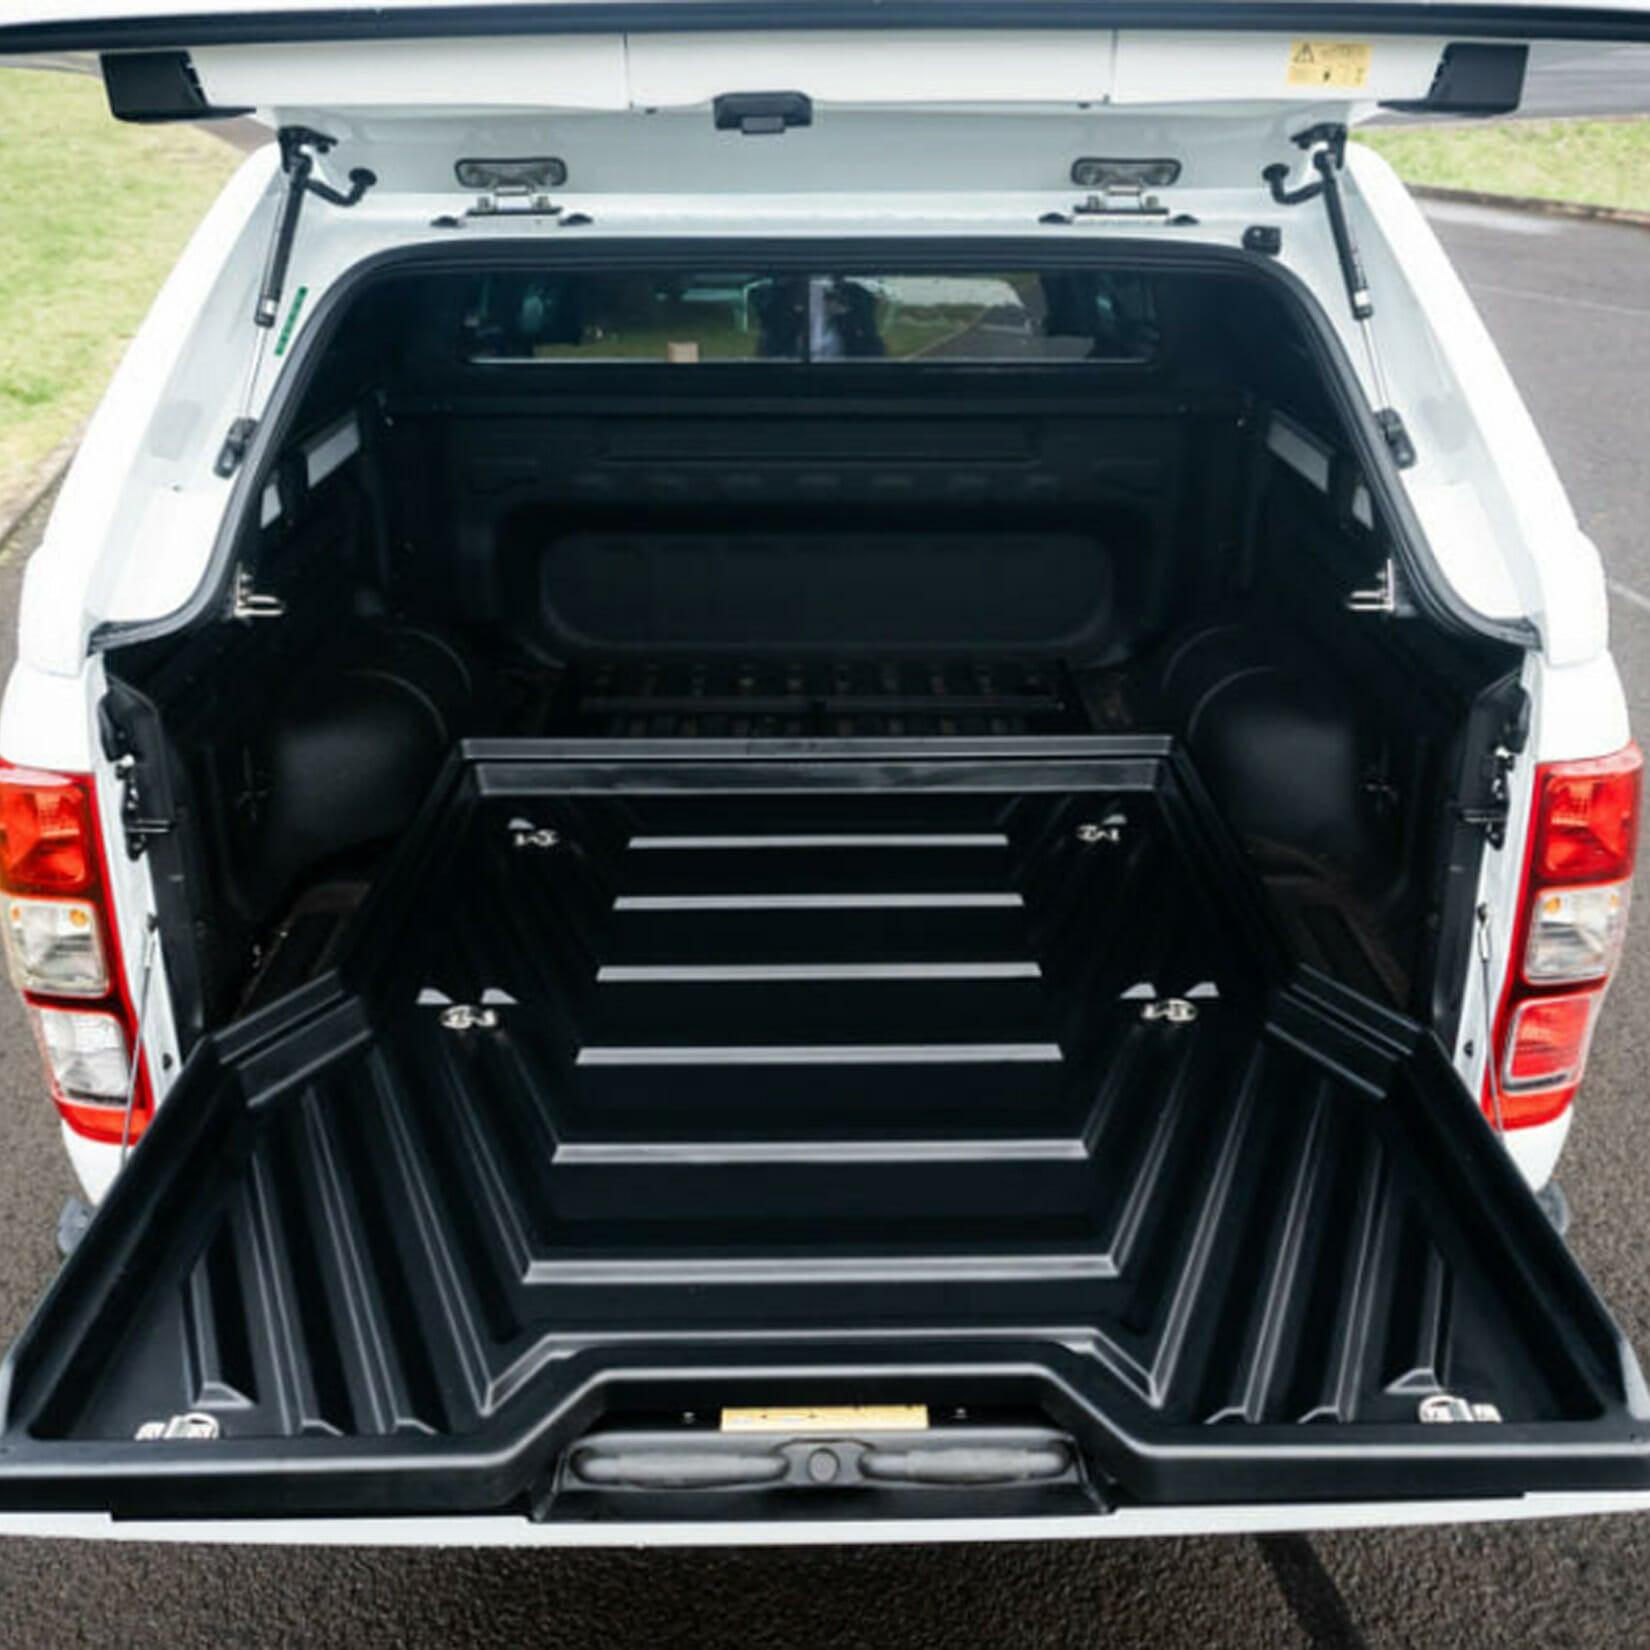 UNIVERSAL HEAVY DUTY PLASTIC LOAD BED SLIDING TRAY – DOUBLE CAB PICKUP - Storm Xccessories2